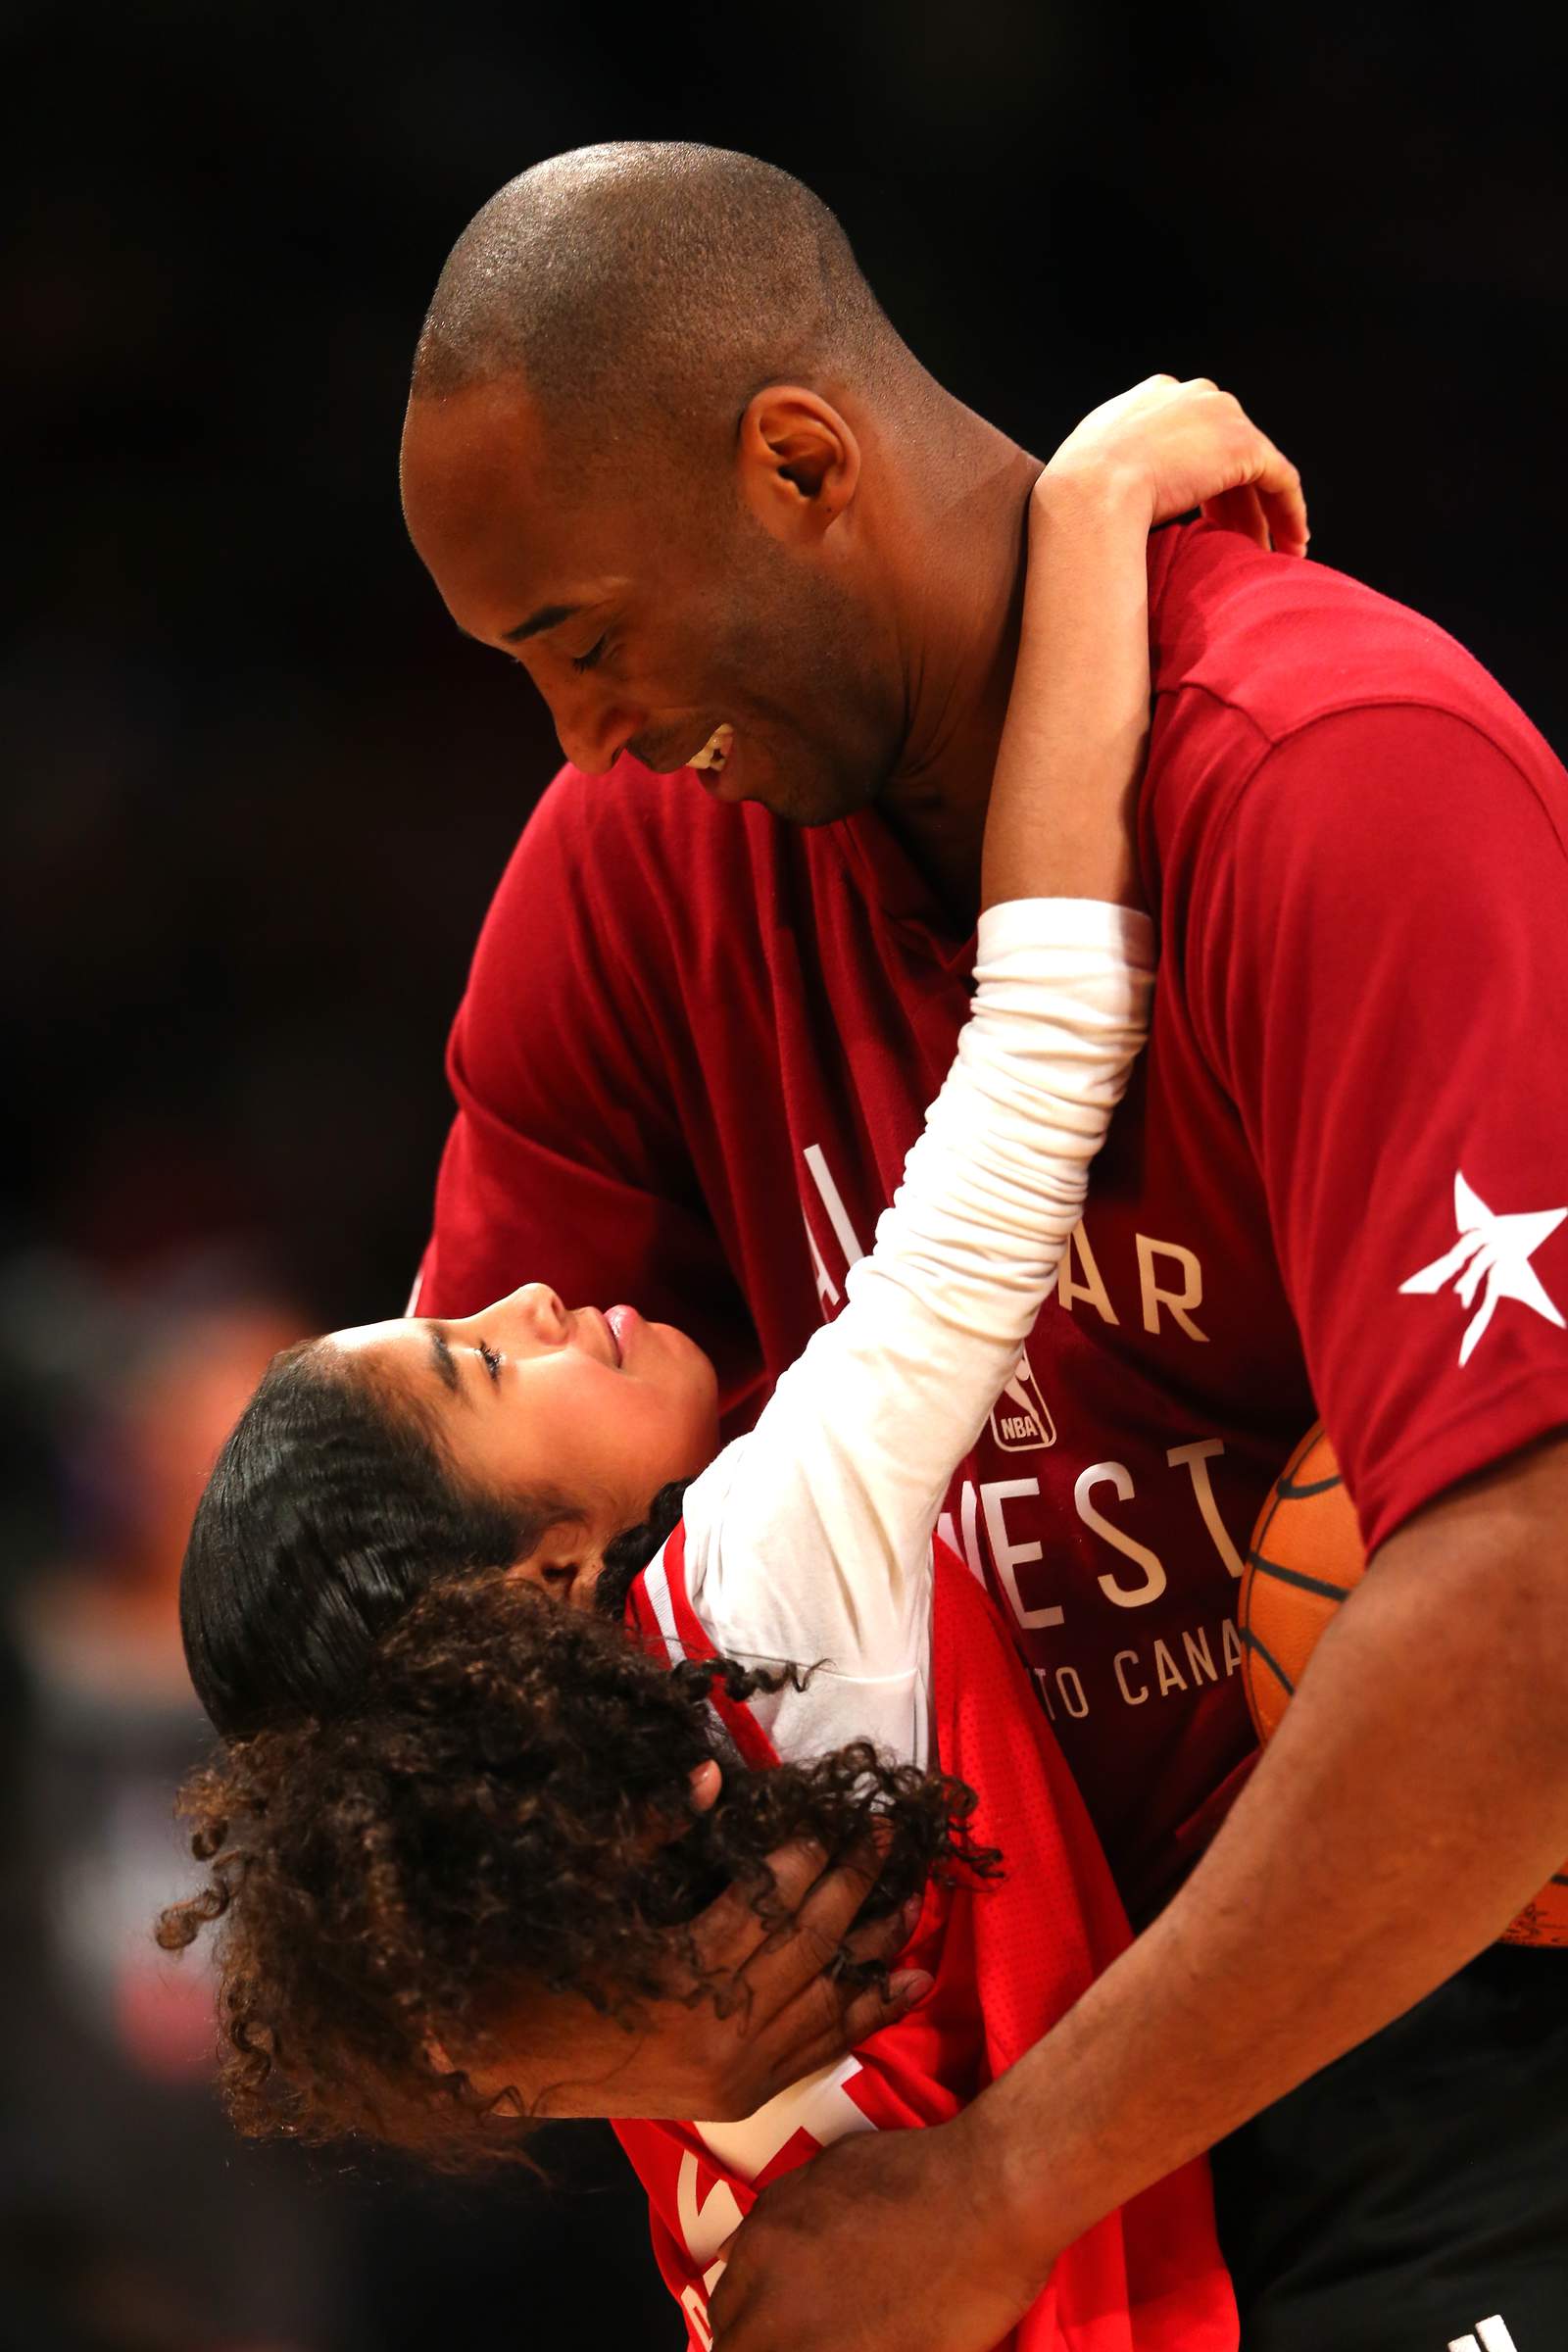 Kobe Bryant warms up with daughter Gianna Bryant during the NBA All-Star Game 2016 at the Air Canada Centre in Toronto.